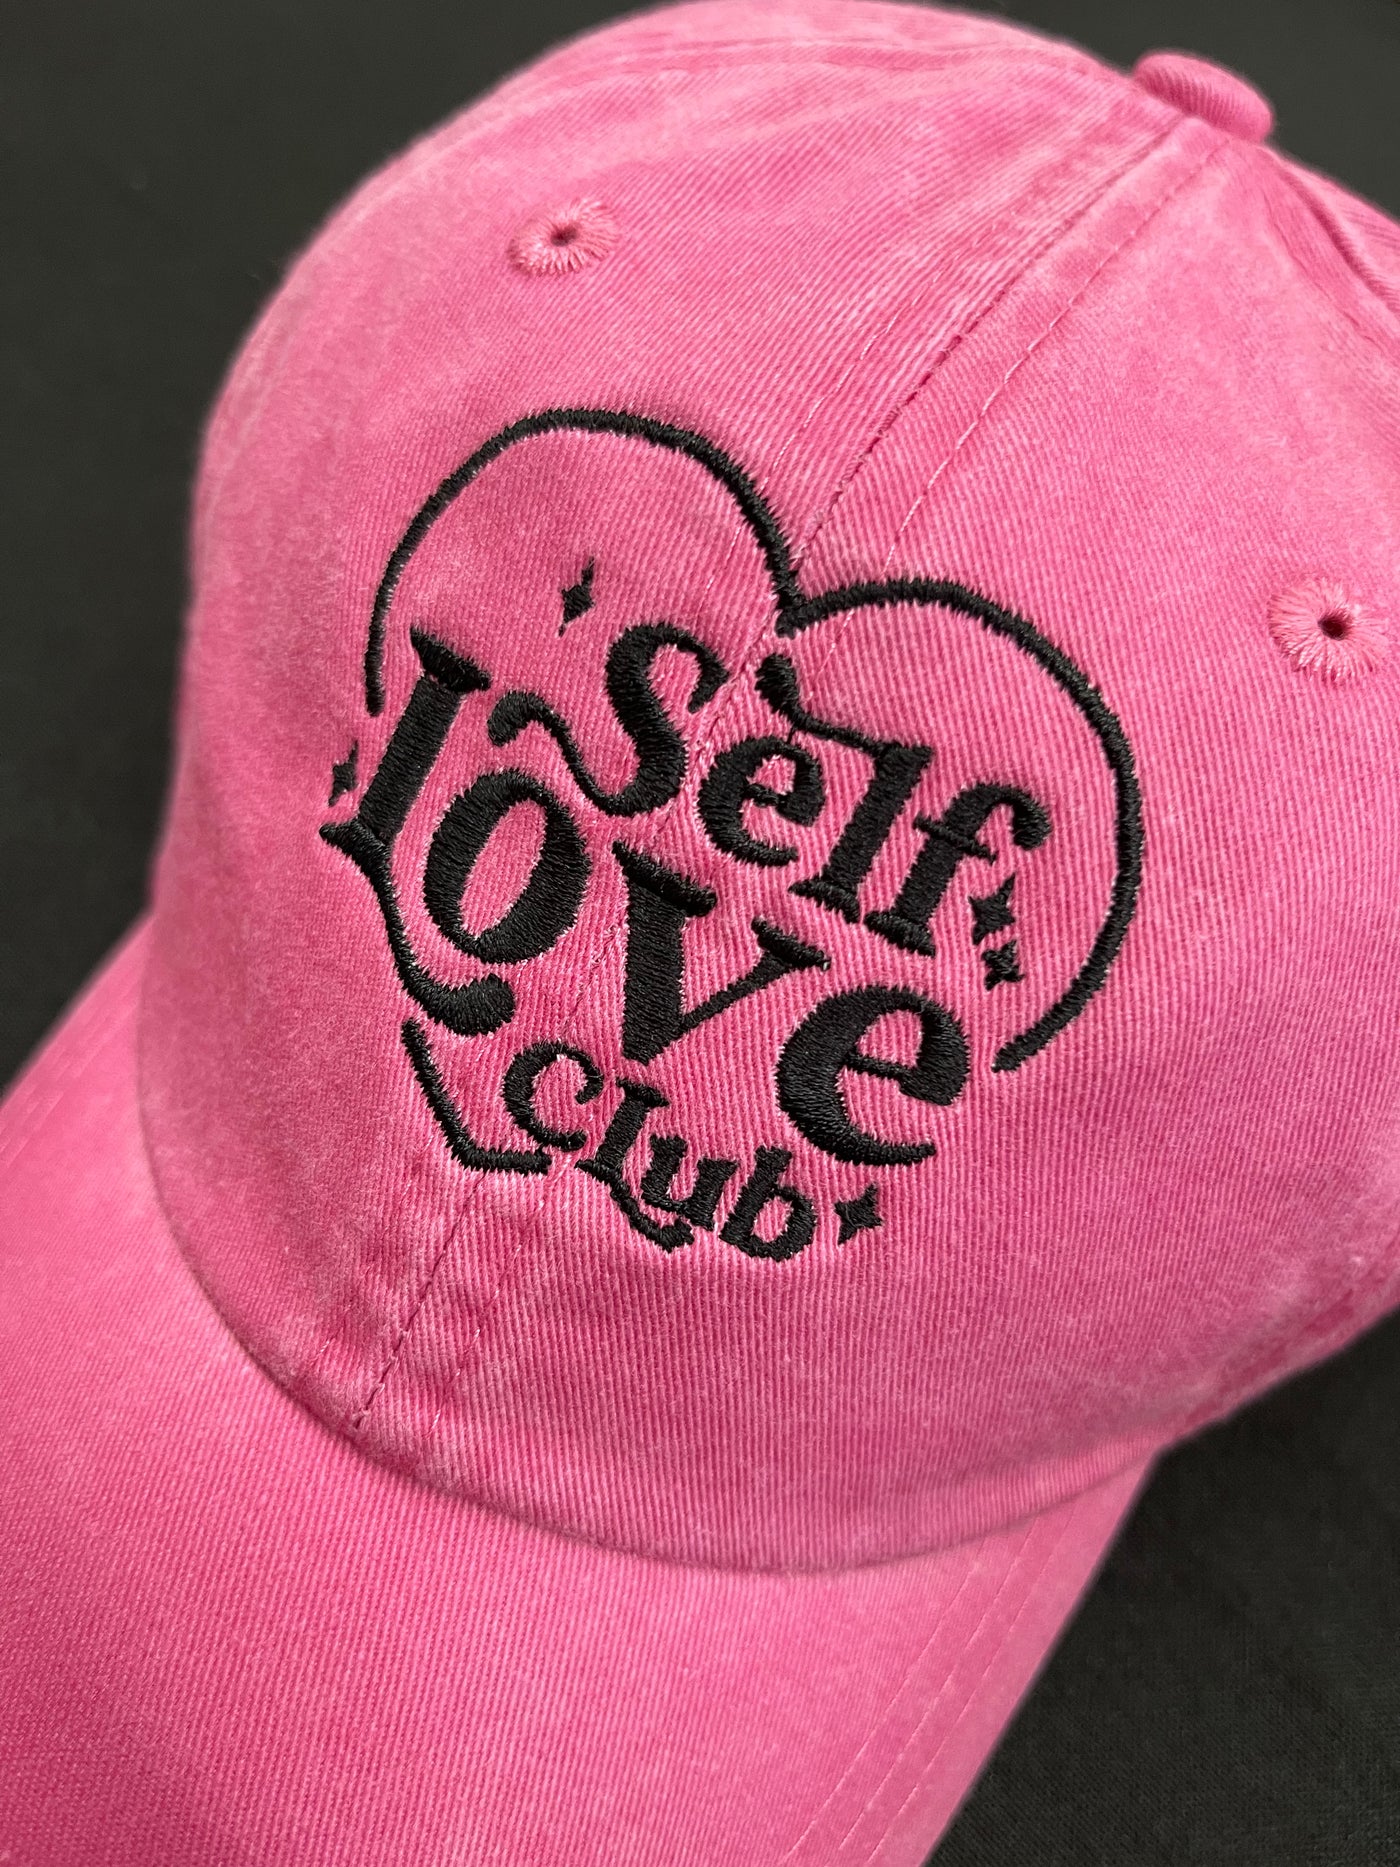 Self Love Club Embroidered Hat